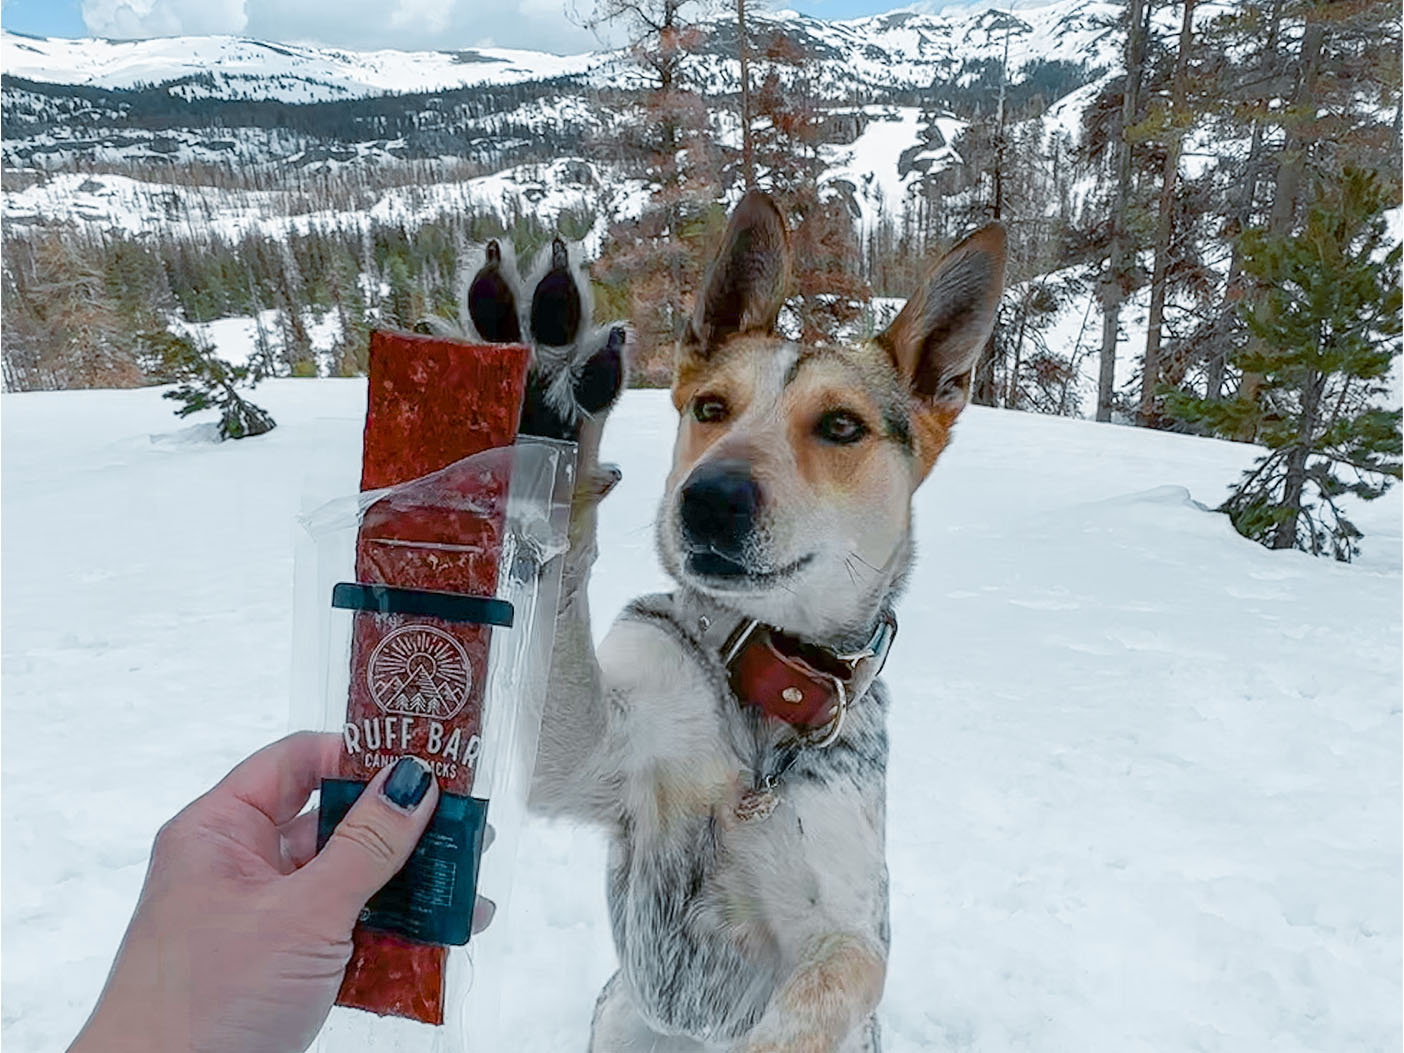 Beef Ruff Bar Healthy Energy Power Bar Snack Treat for Dogs